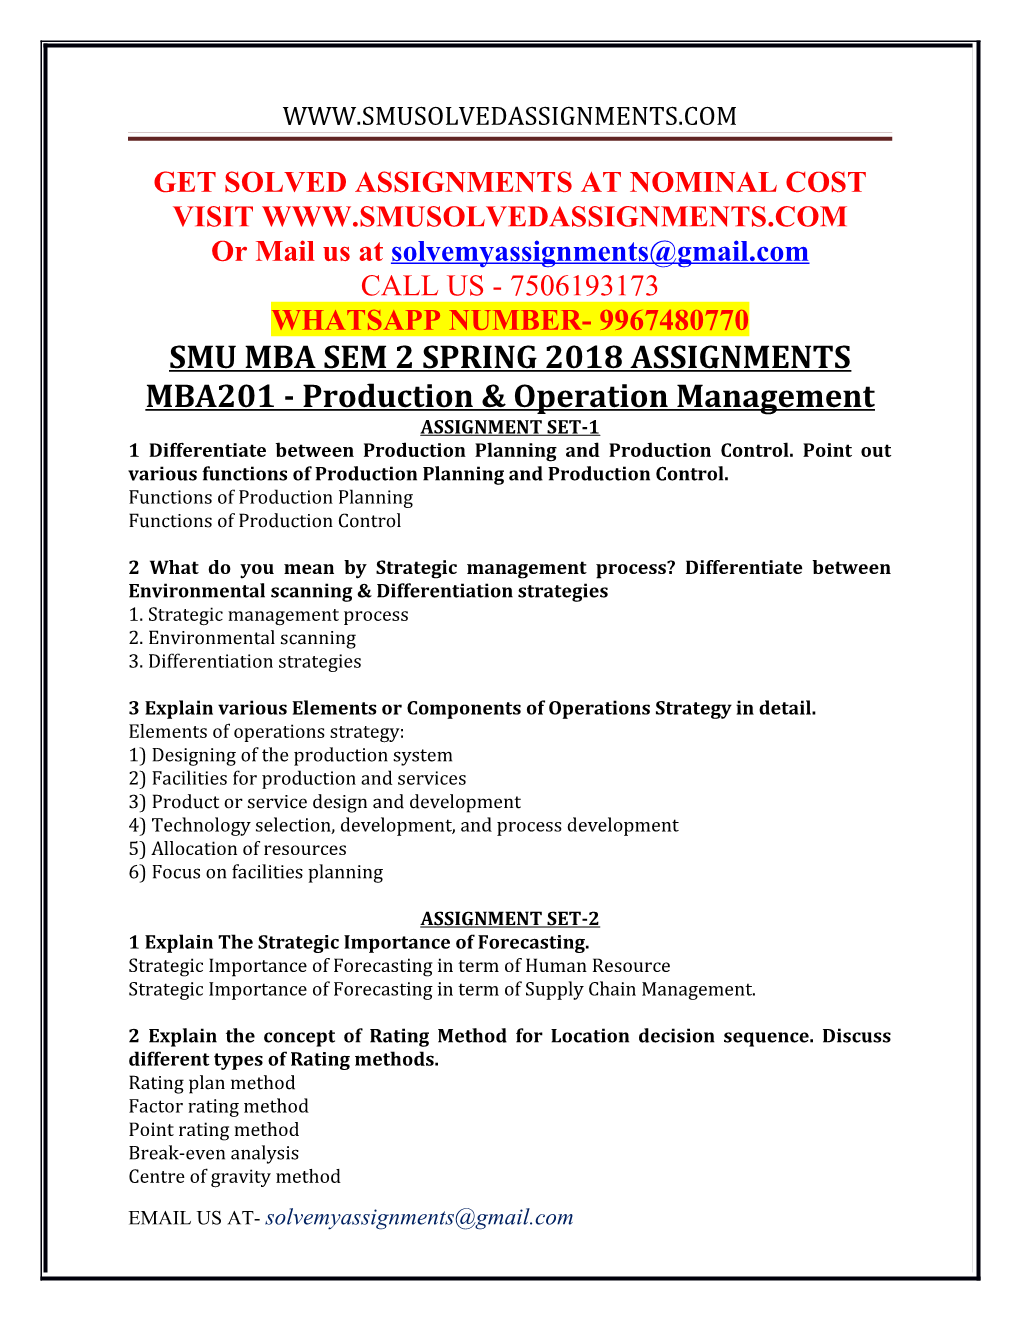 Get Solved Assignments at Nominal Cost